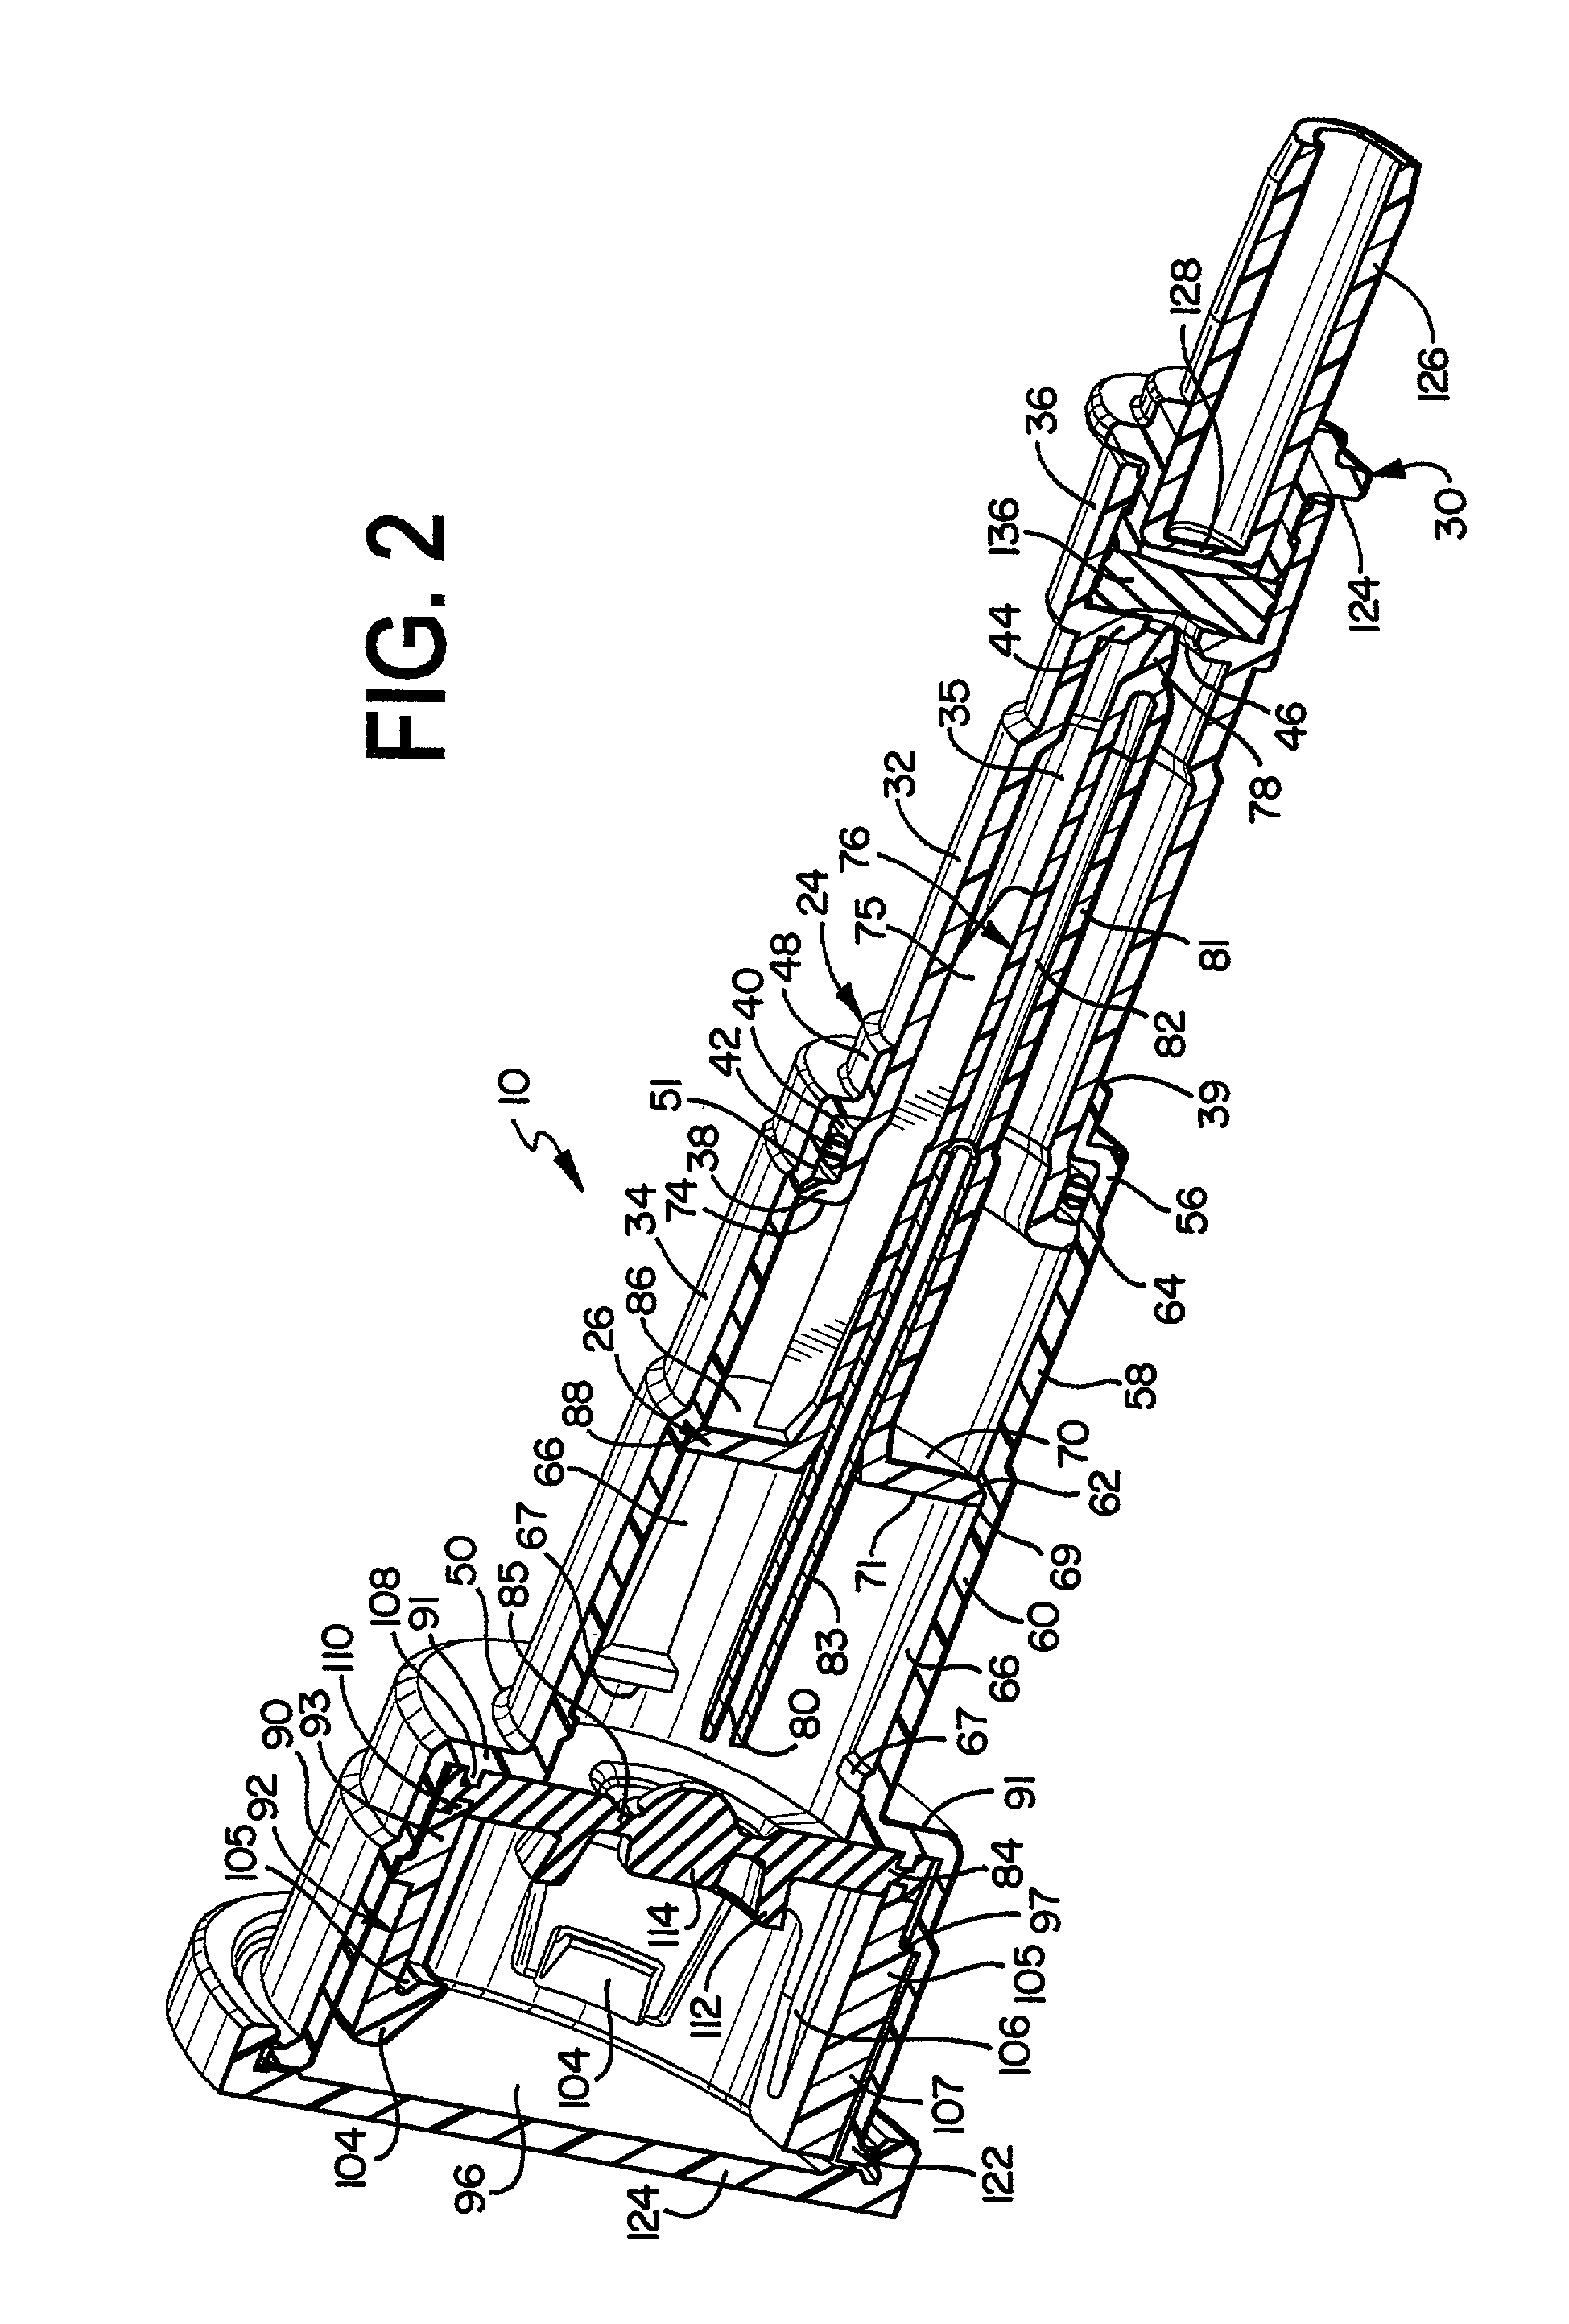 Sliding reconstitution device for a diluent container